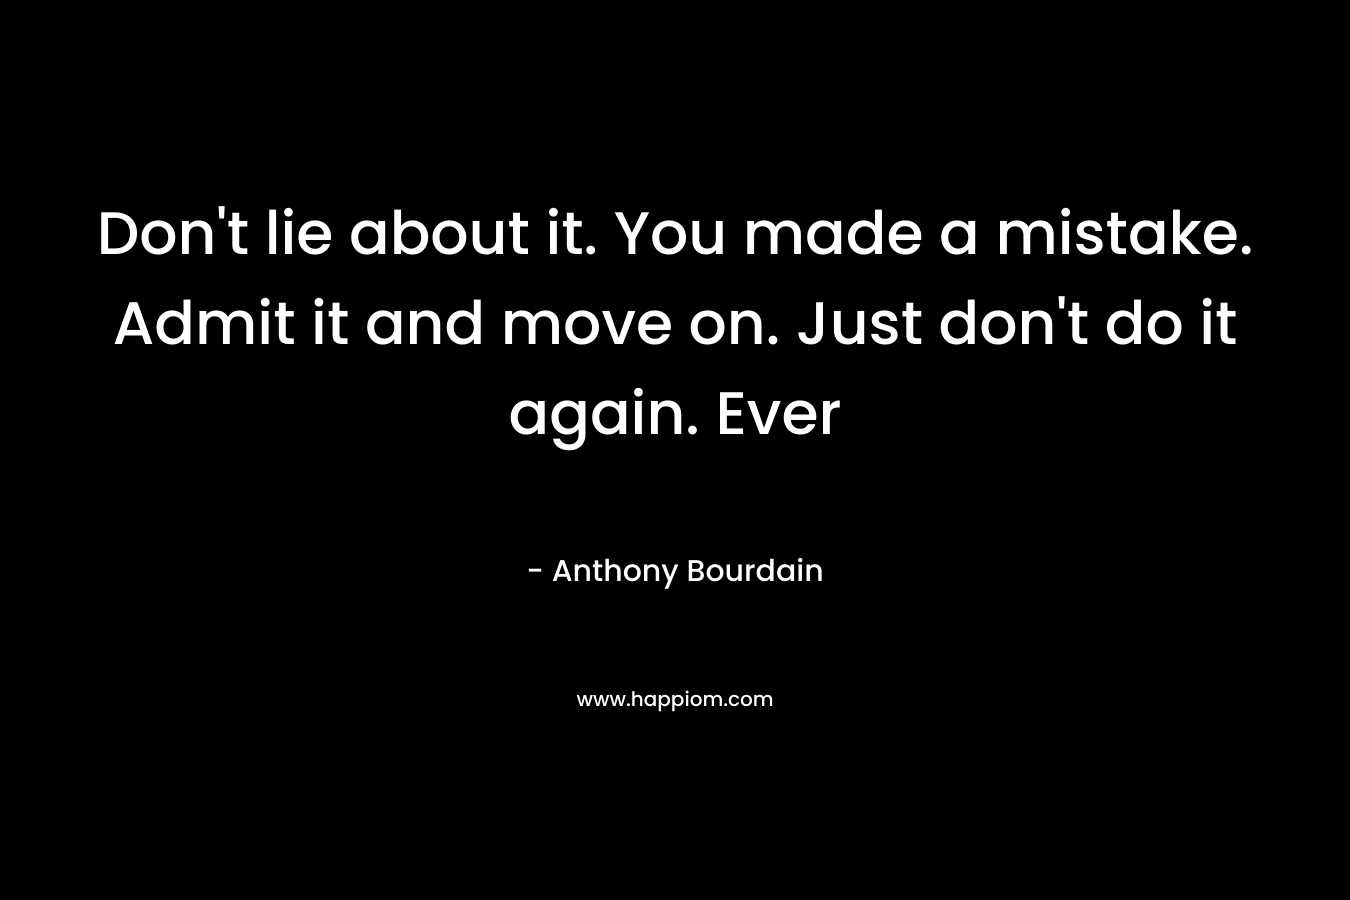 Don’t lie about it. You made a mistake. Admit it and move on. Just don’t do it again. Ever – Anthony Bourdain